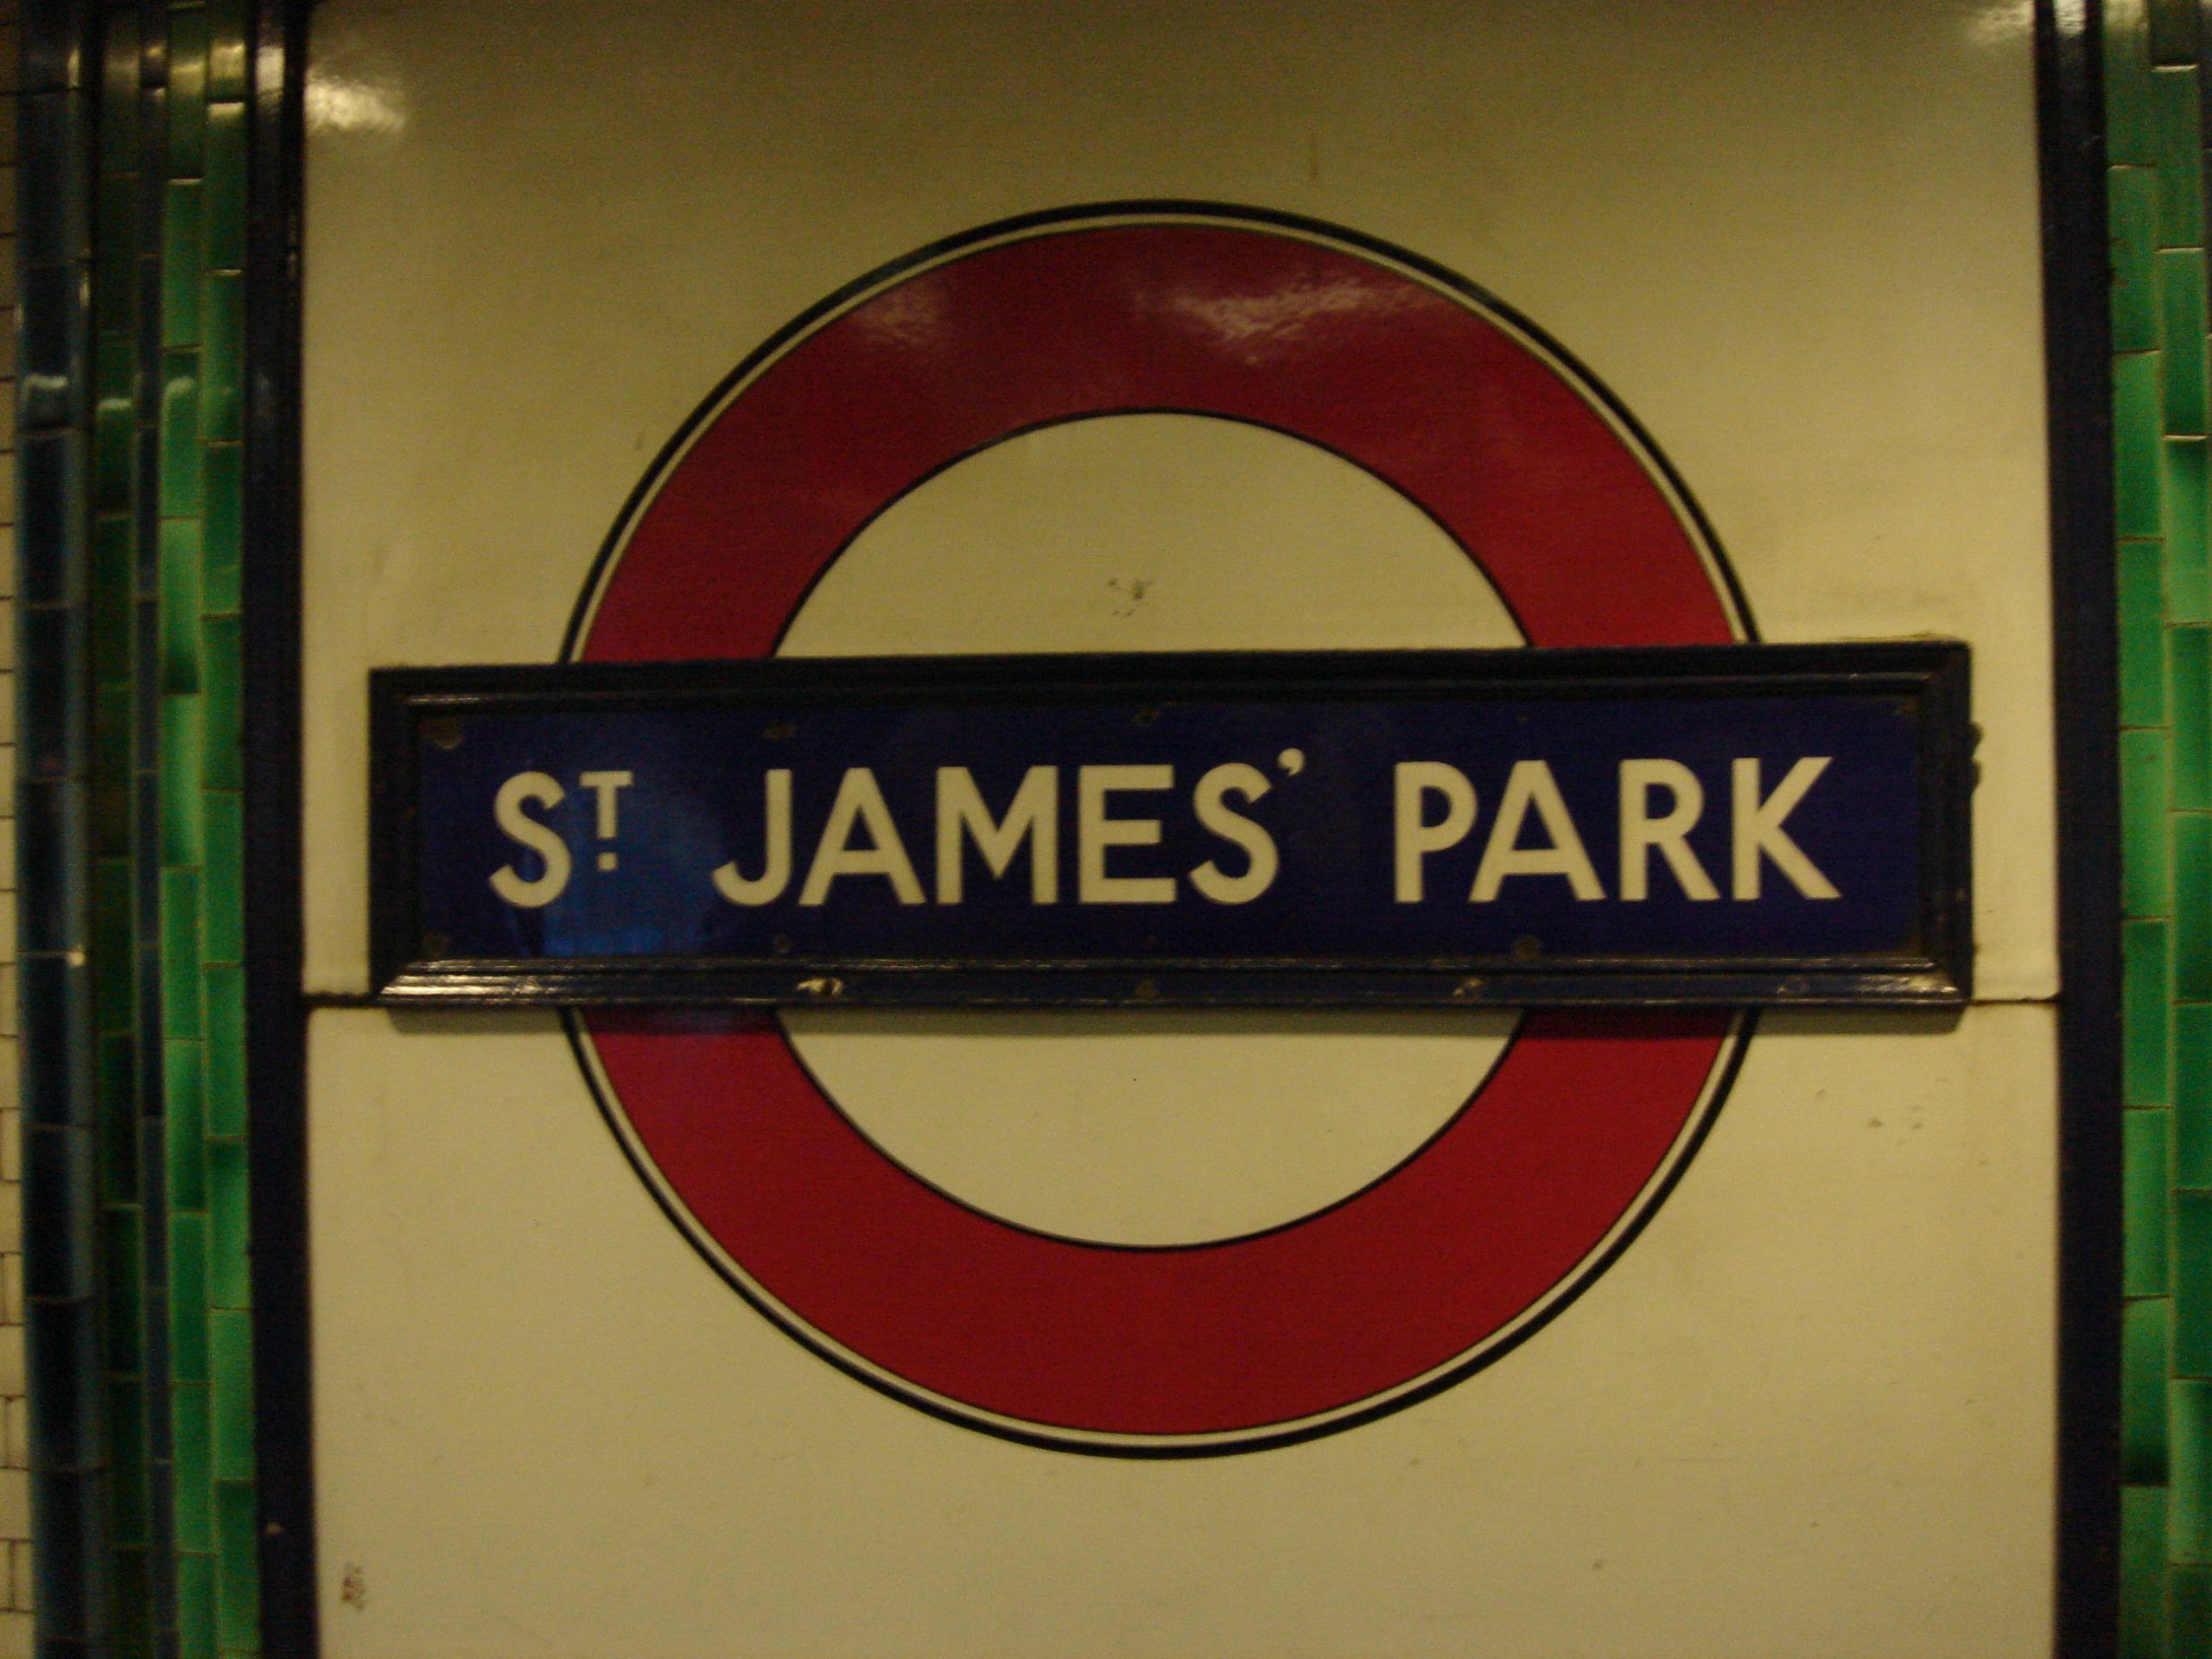 A London tube station sign that says ST JAMES' PARK